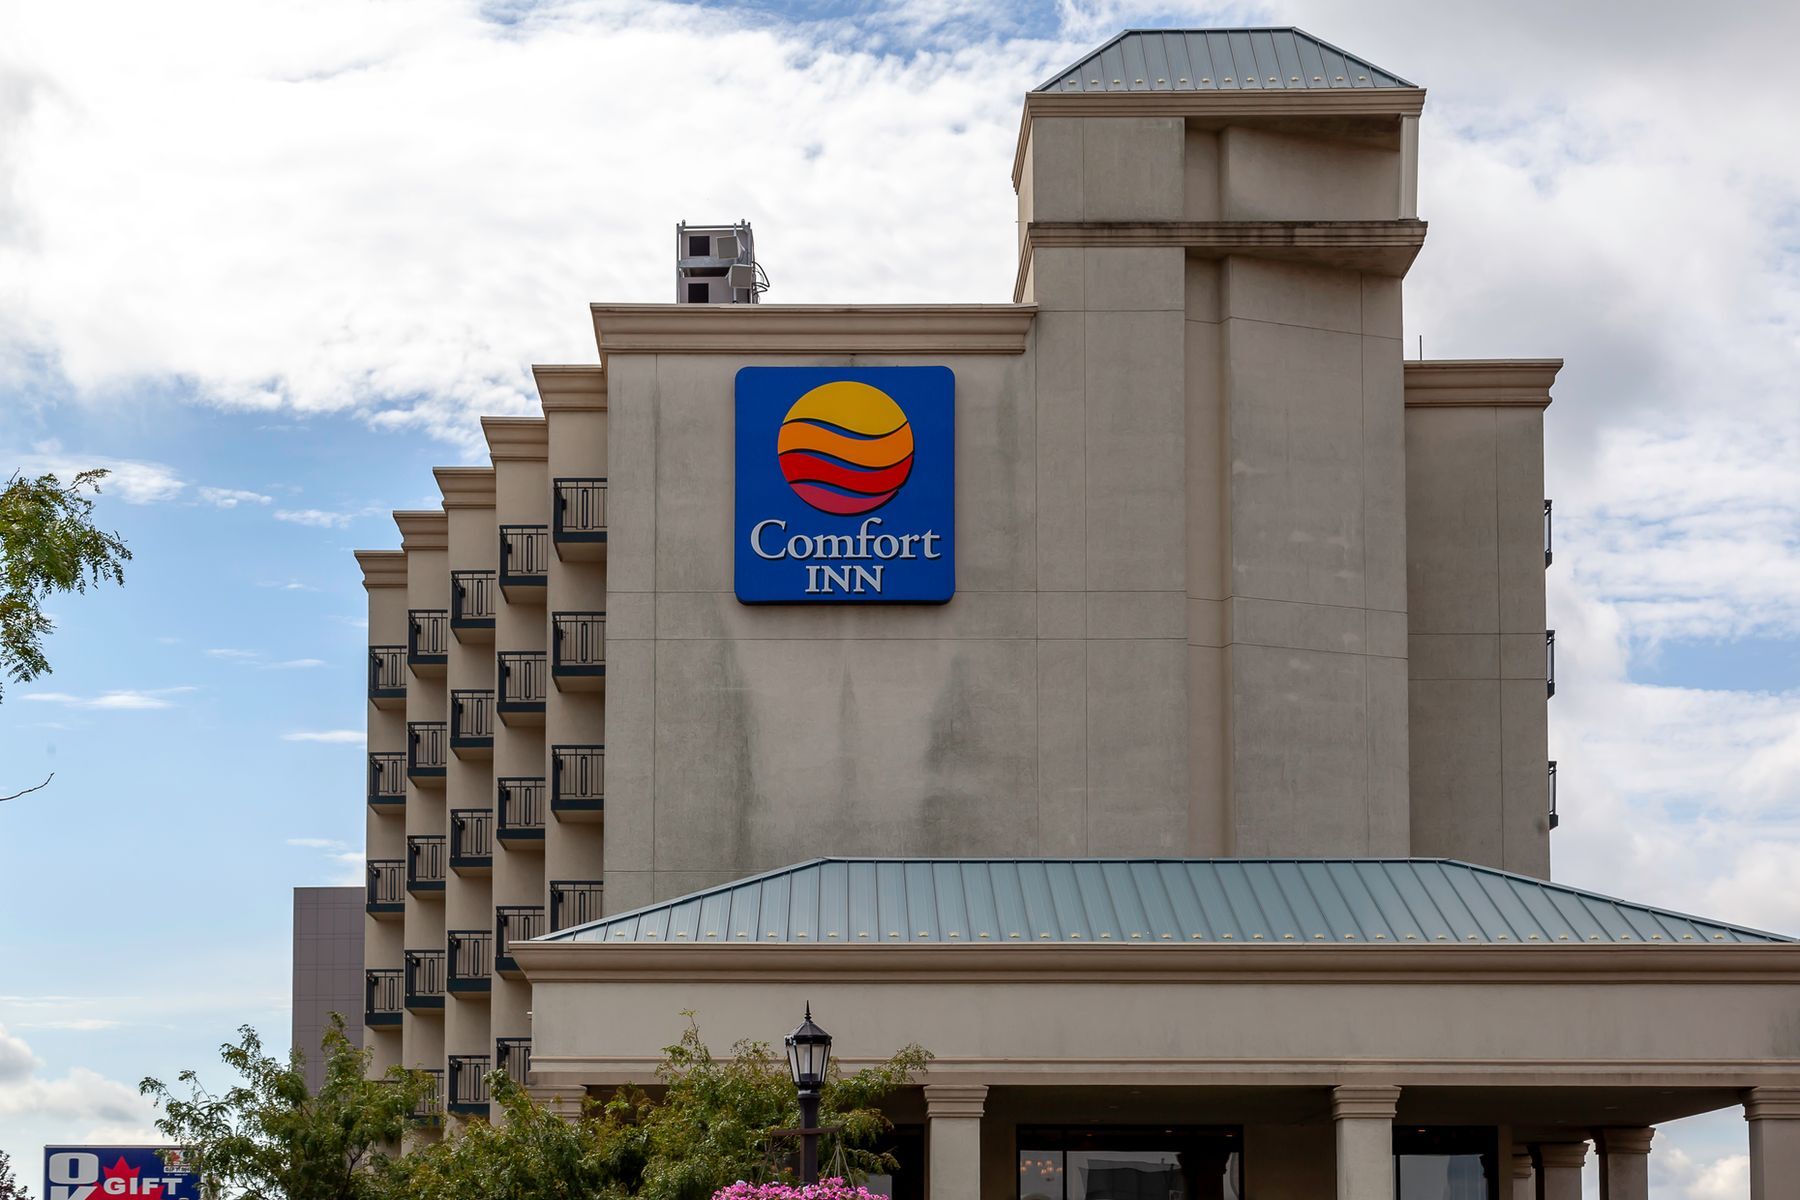 <p>Sometimes a name can do an excellent job of carrying the brand promise, as is the case with Comfort Inn, which offers <a href="https://www.choicehotels.com/en-ca/comfort-inn">budget-friendly, smoke-free hotels</a> with free breakfast and pools at most locations. Owned by parent company Choice Hotels International, Comfort Inn is considered one of their midscale brands between economy options such as Econo Lodge and the upscale Cambria Hotels. </p>